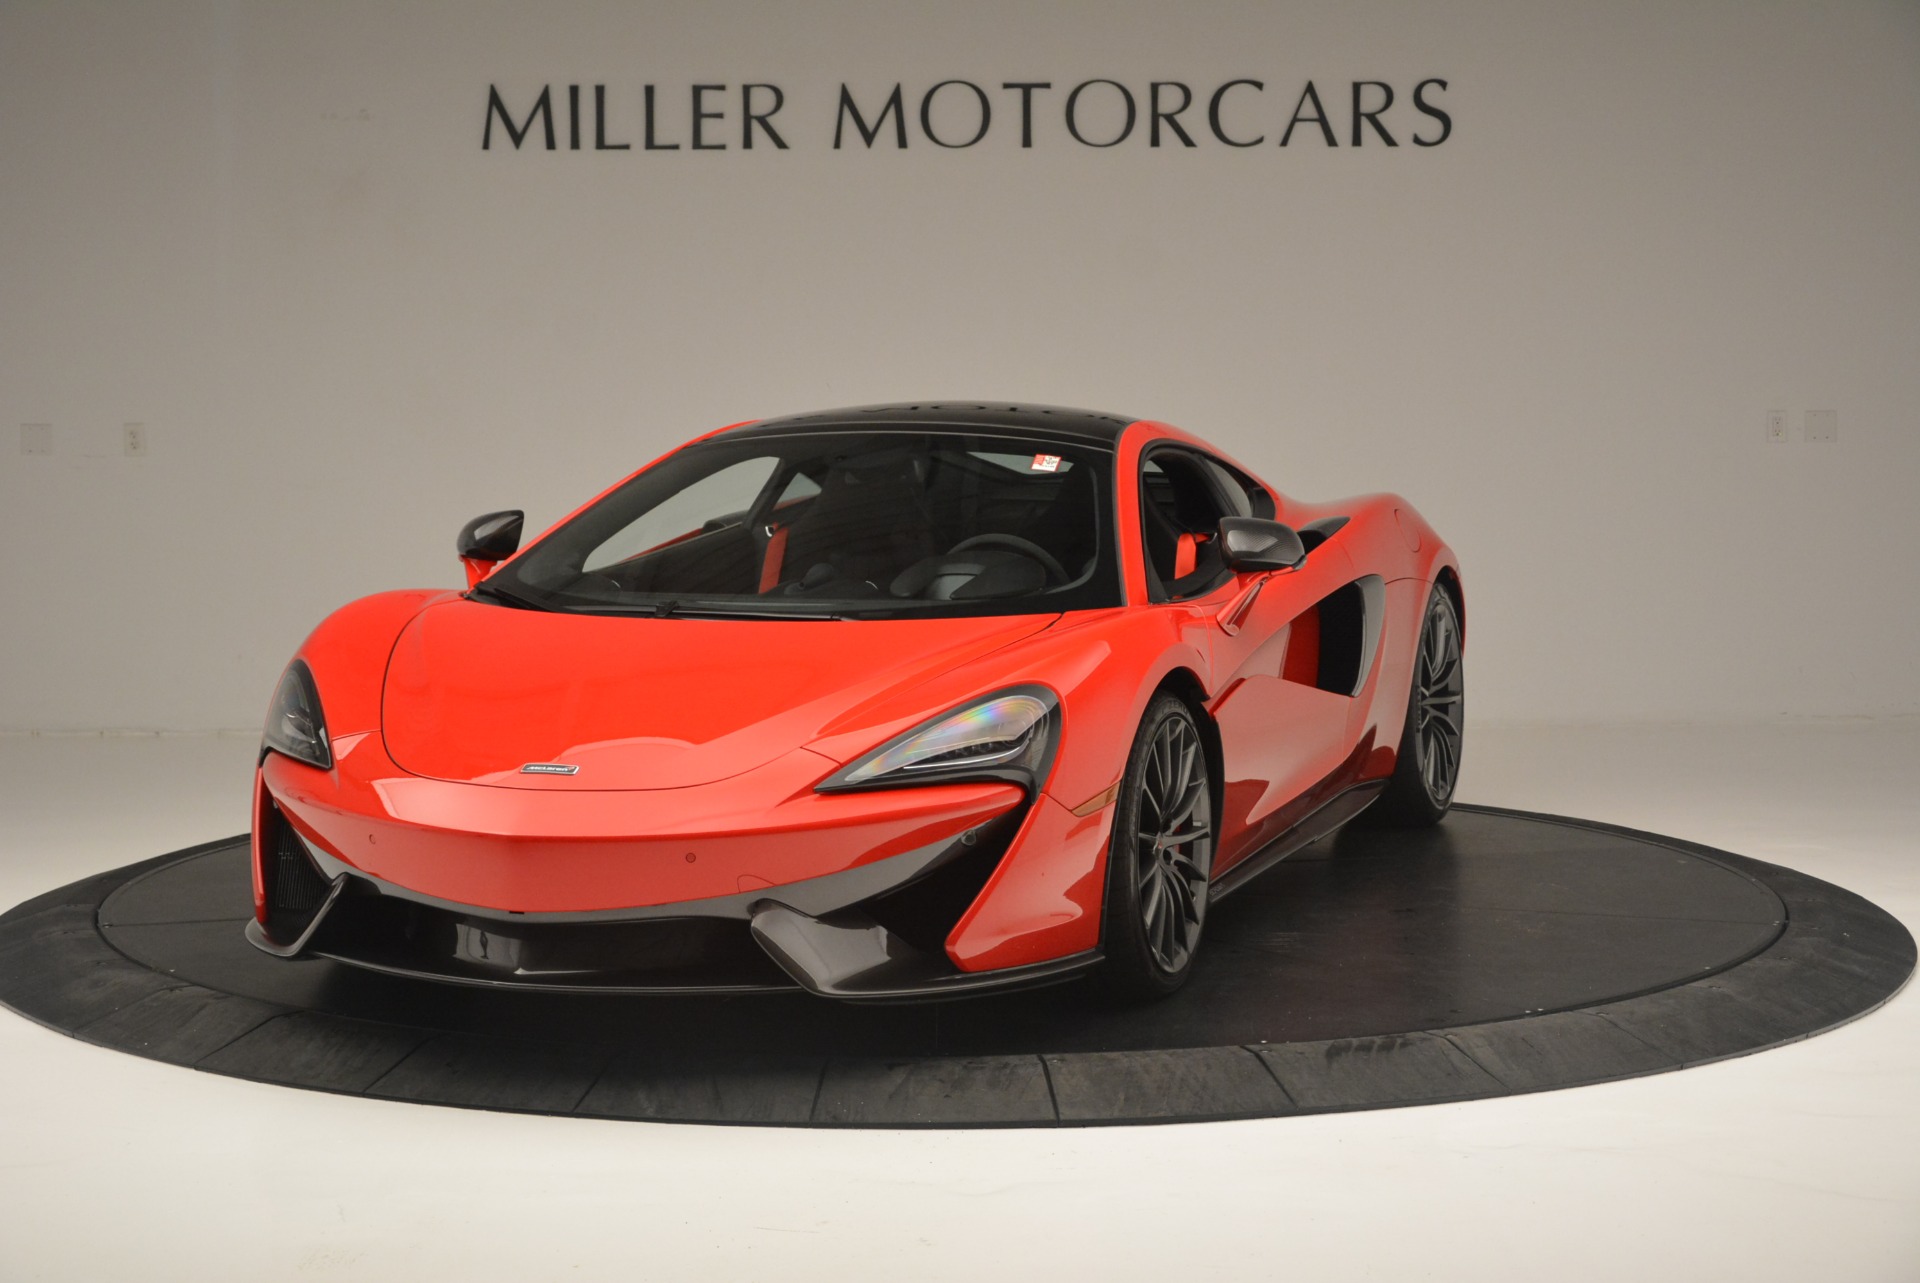 Used 2018 McLaren 570GT for sale Sold at Alfa Romeo of Greenwich in Greenwich CT 06830 1